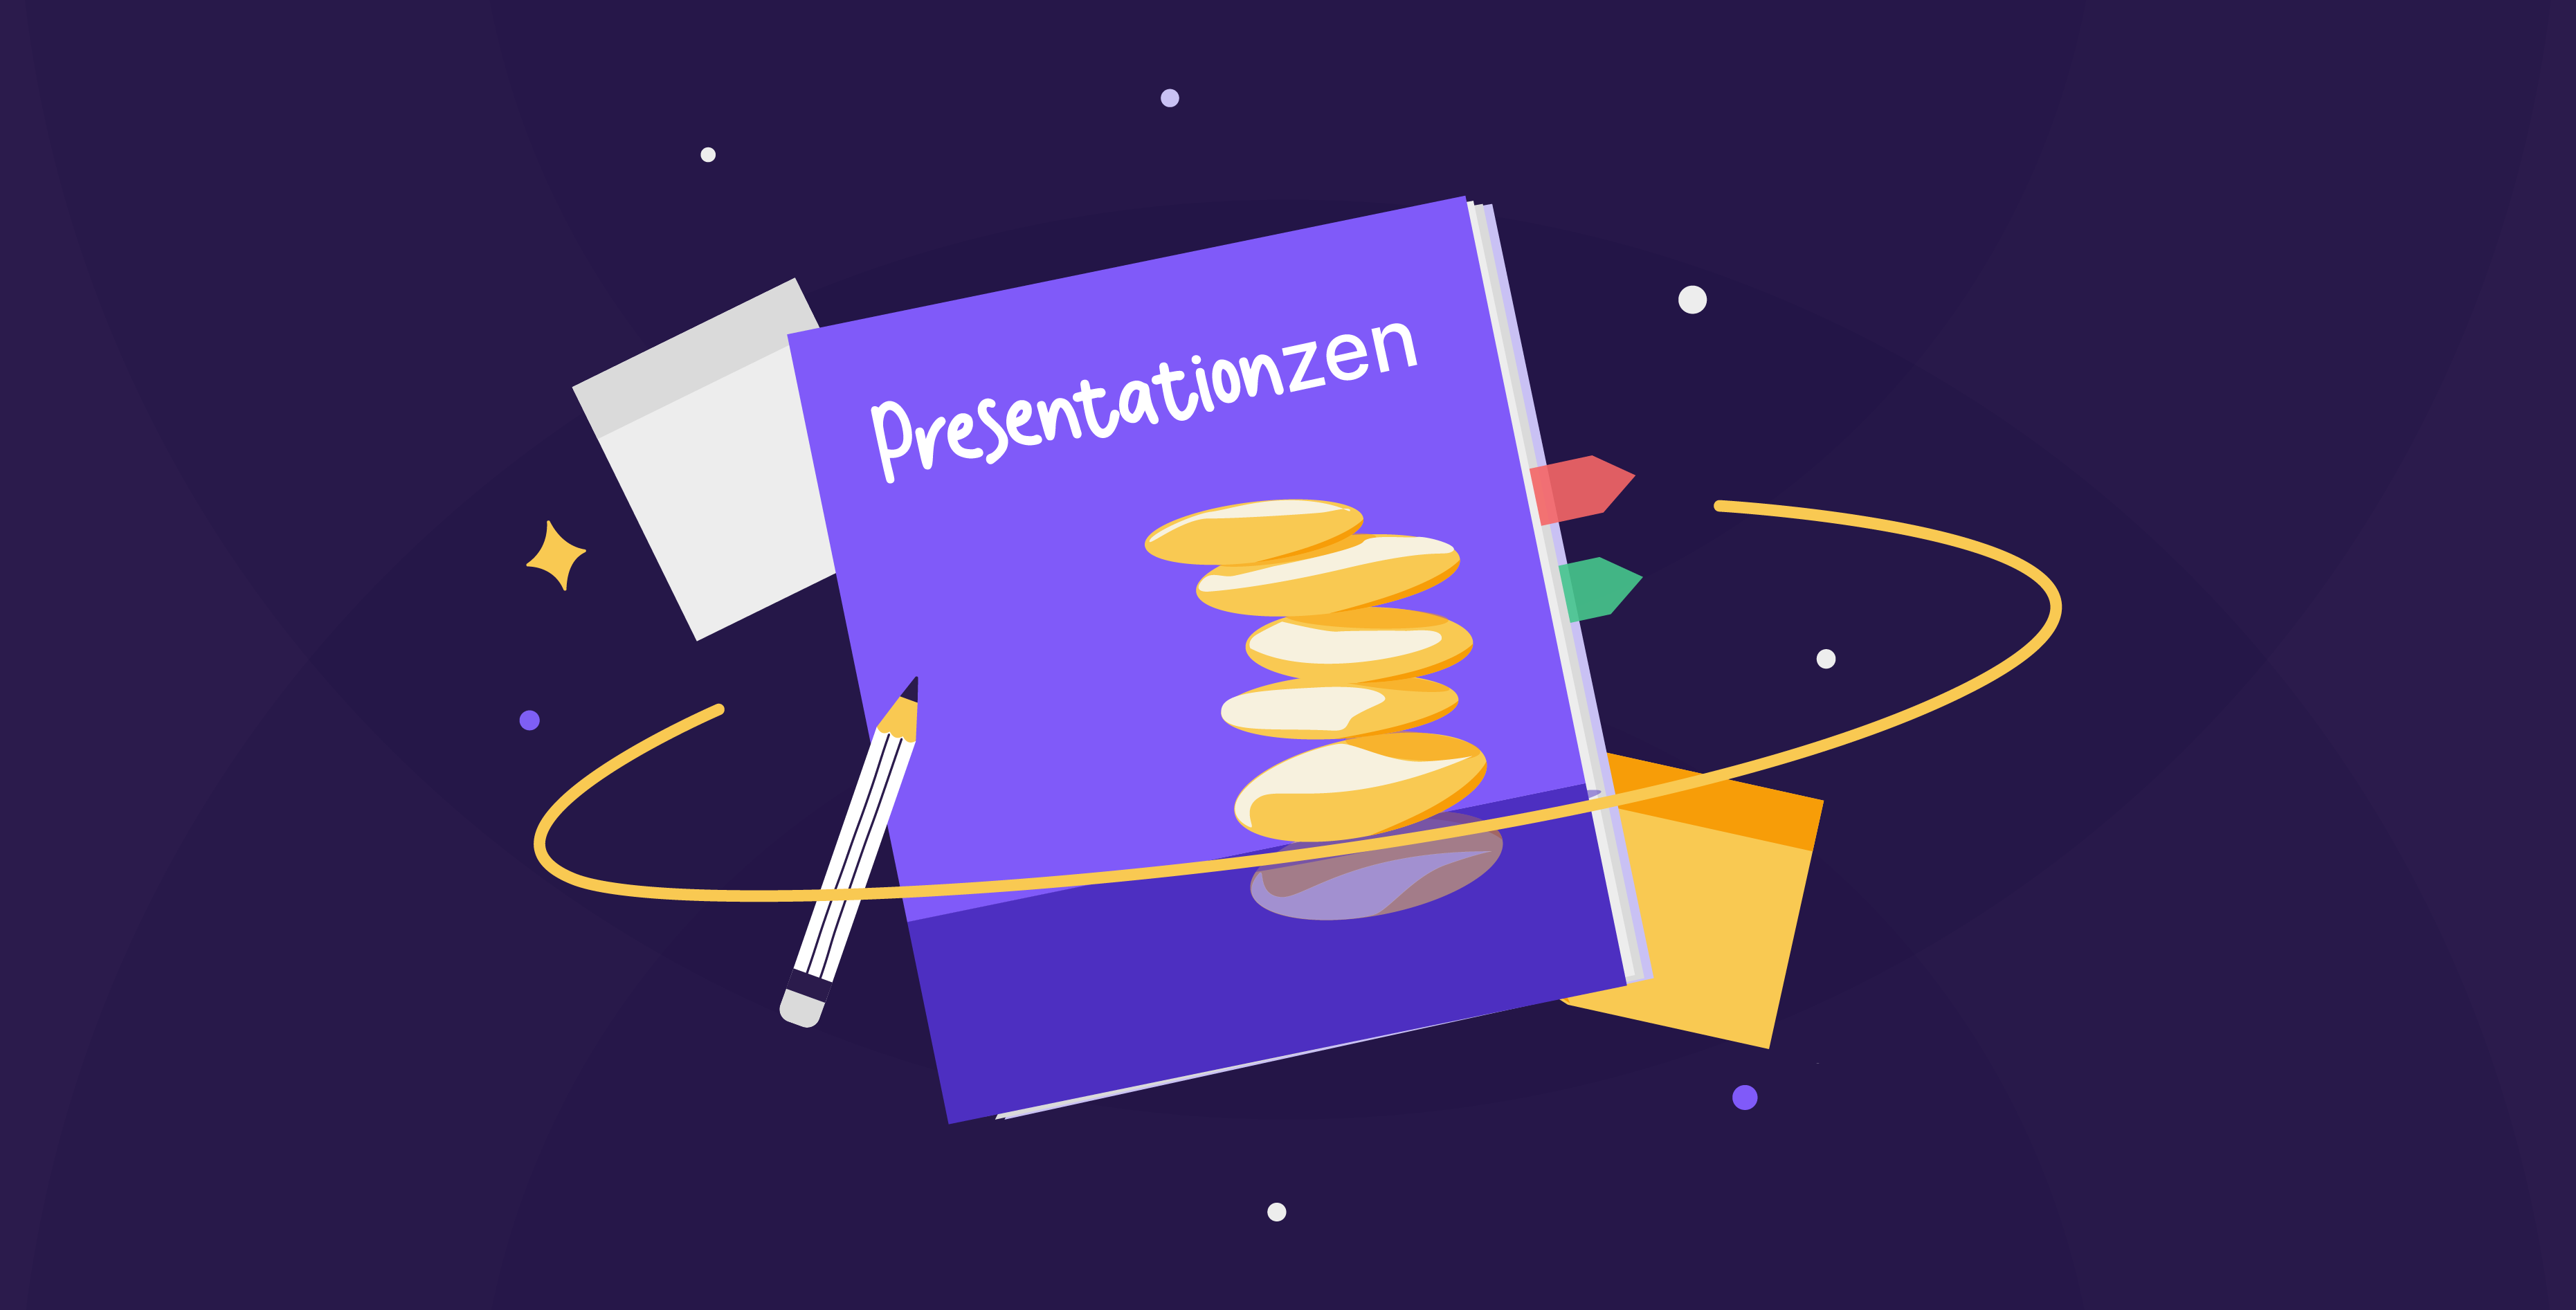 Presentation design lessons from the best-selling book “Presentation Zen”